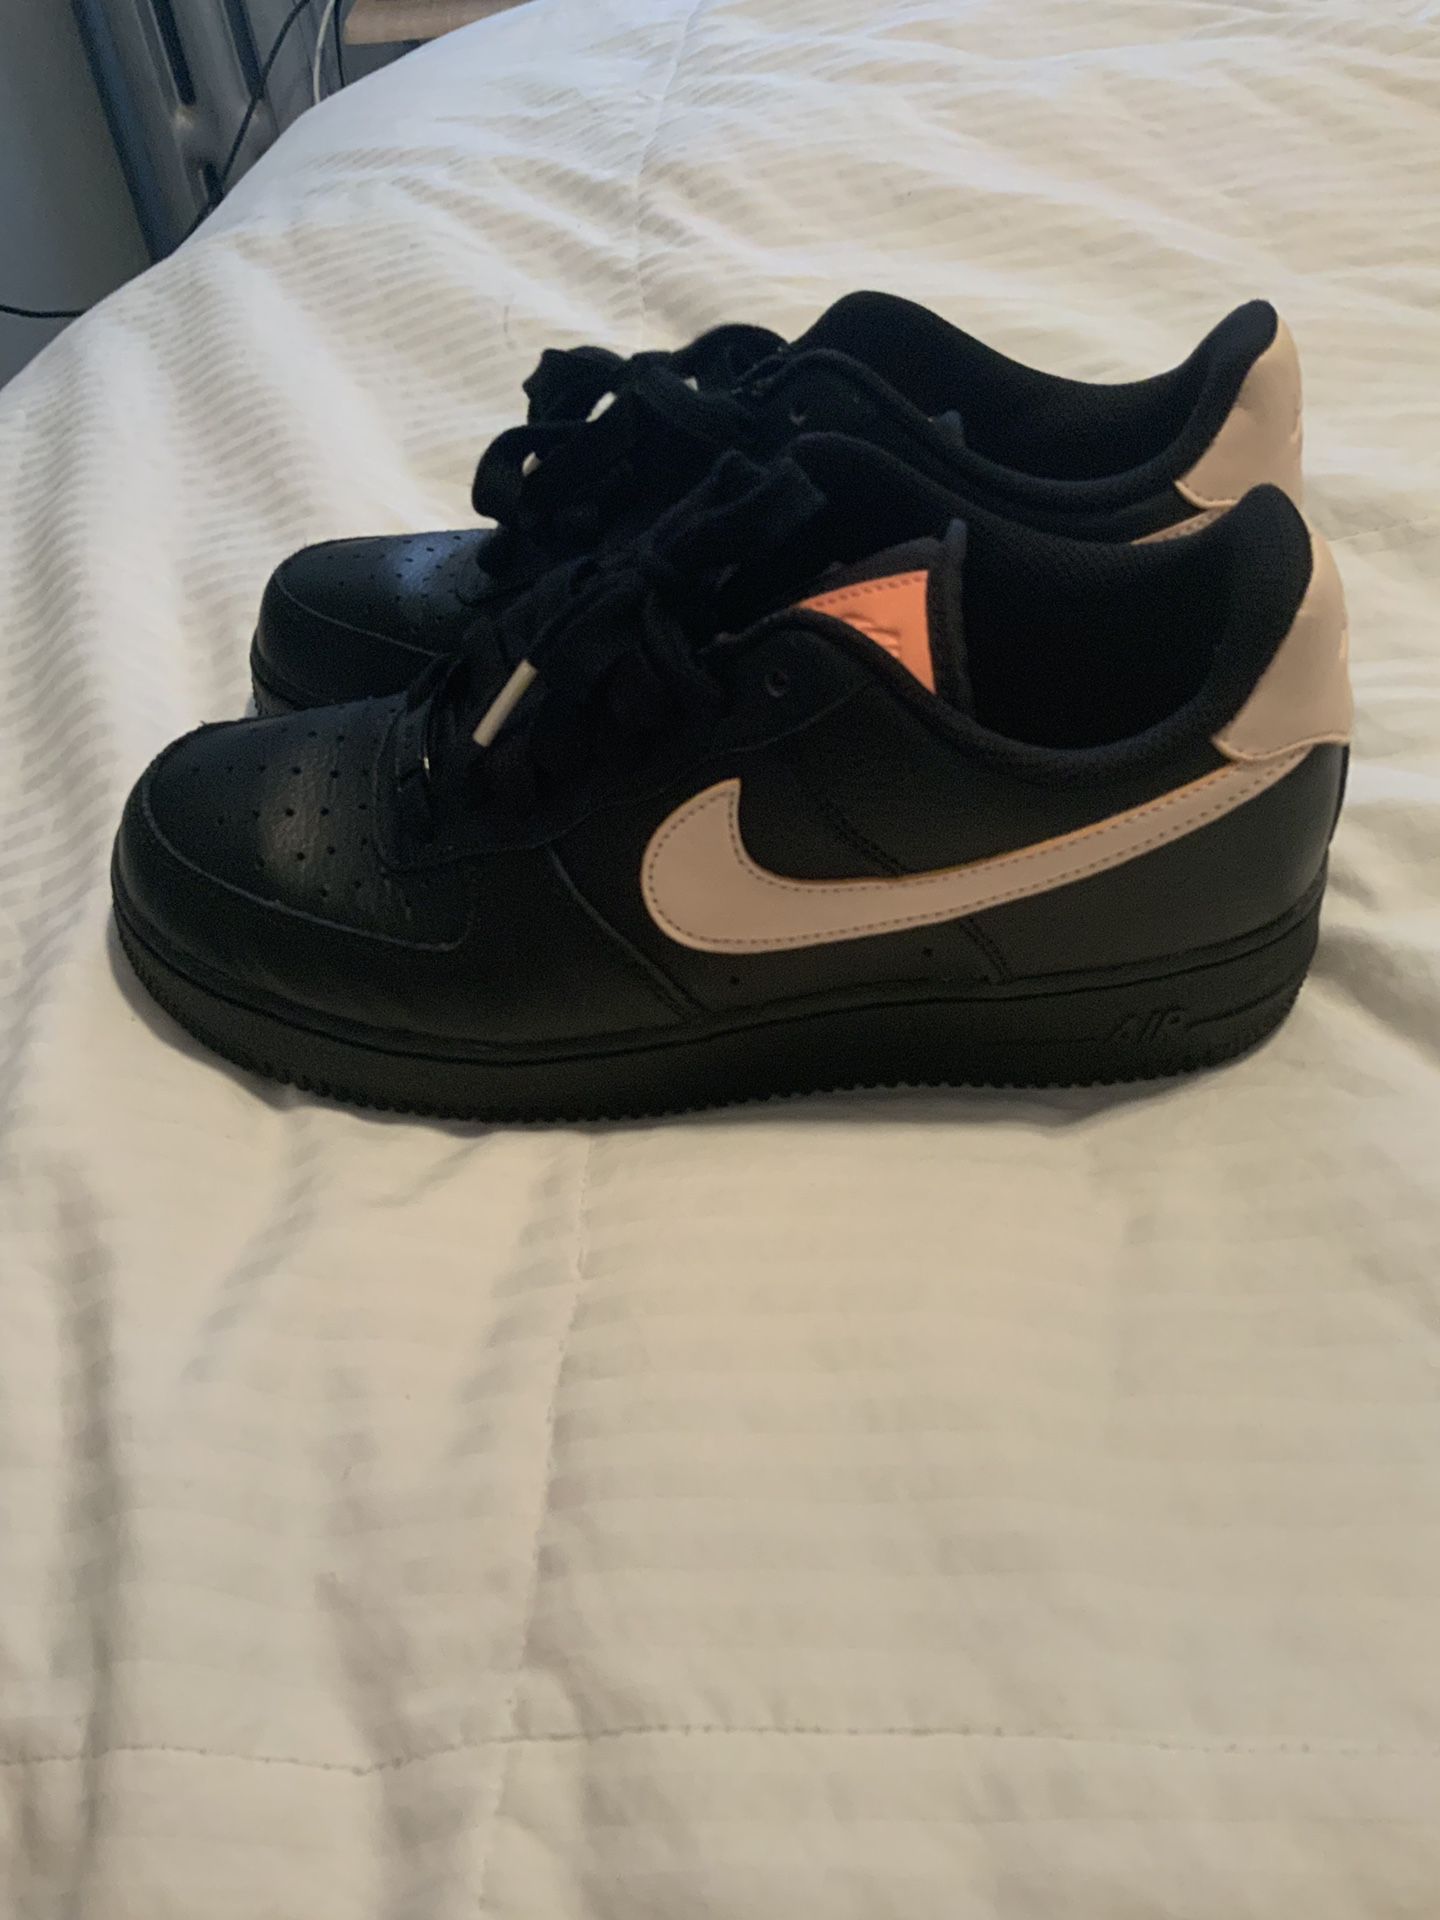 Women’s Nike Air Force 1 Sneakers Size 9